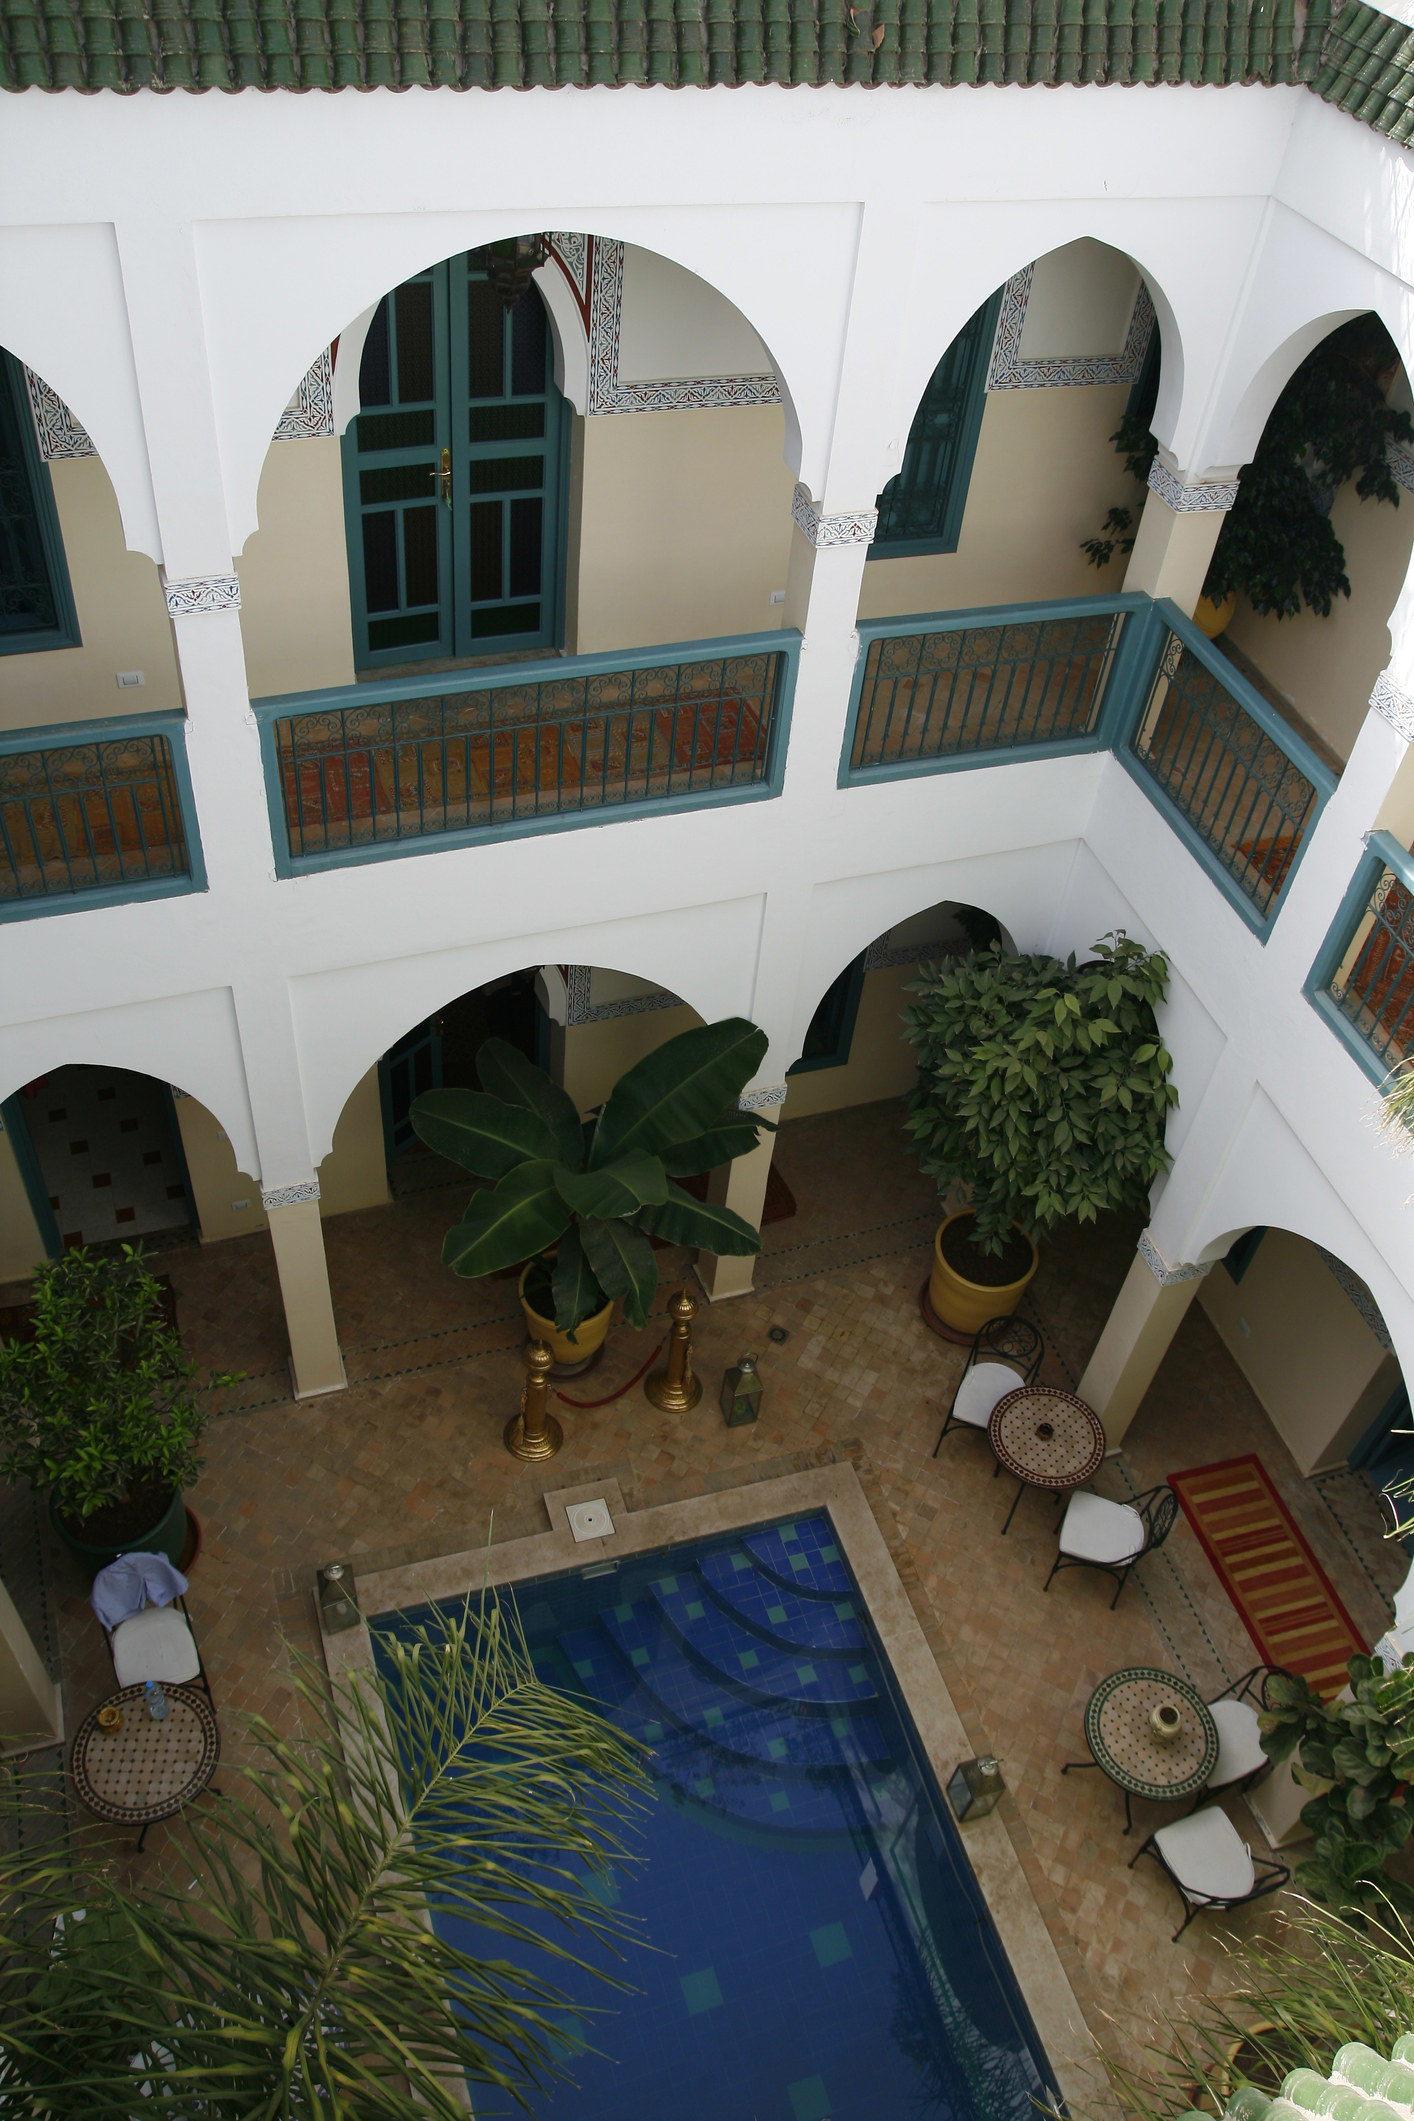 The courtyard of a riad in Morocco.